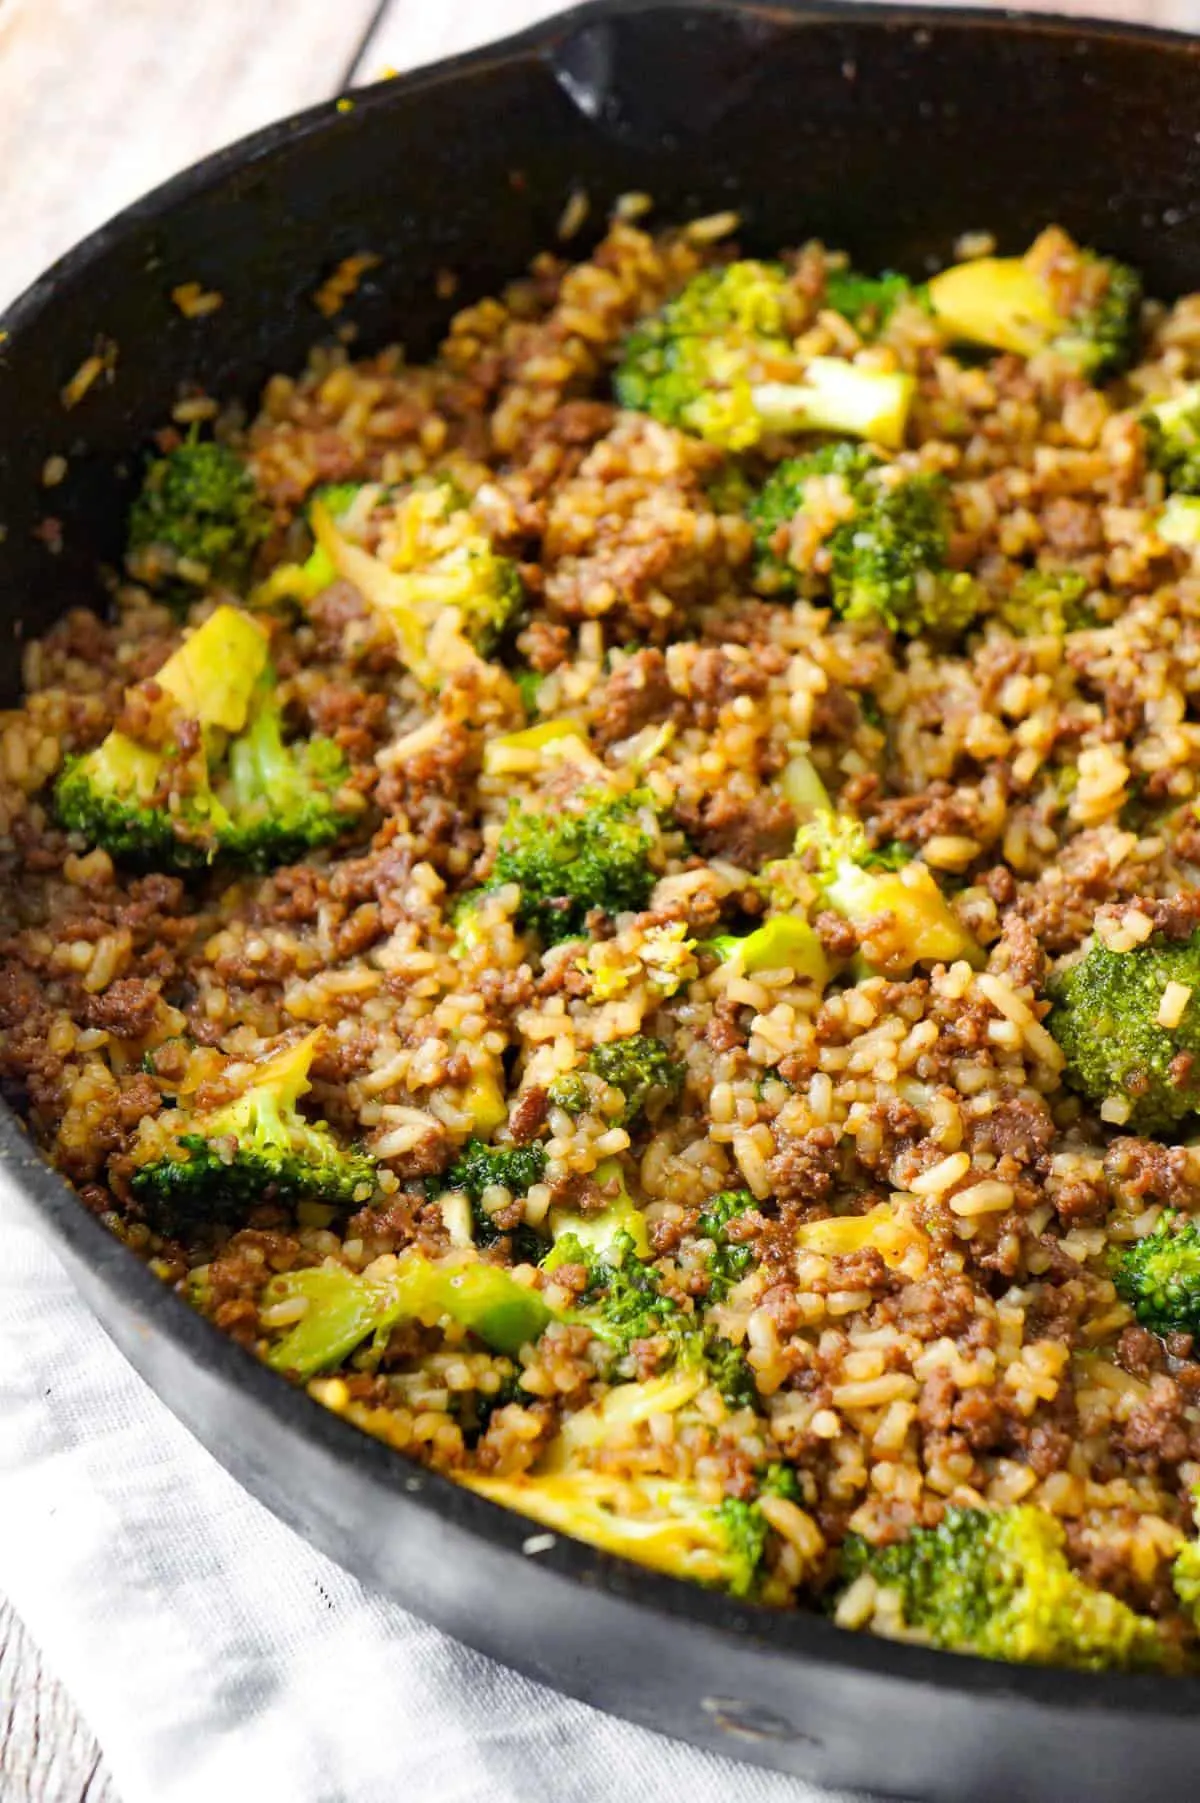 Honey Garlic Ground Beef and Rice with Broccoli is an easy ground beef dinner recipe loaded with instant rice and broccoli florets all tossed in honey garlic sauce.